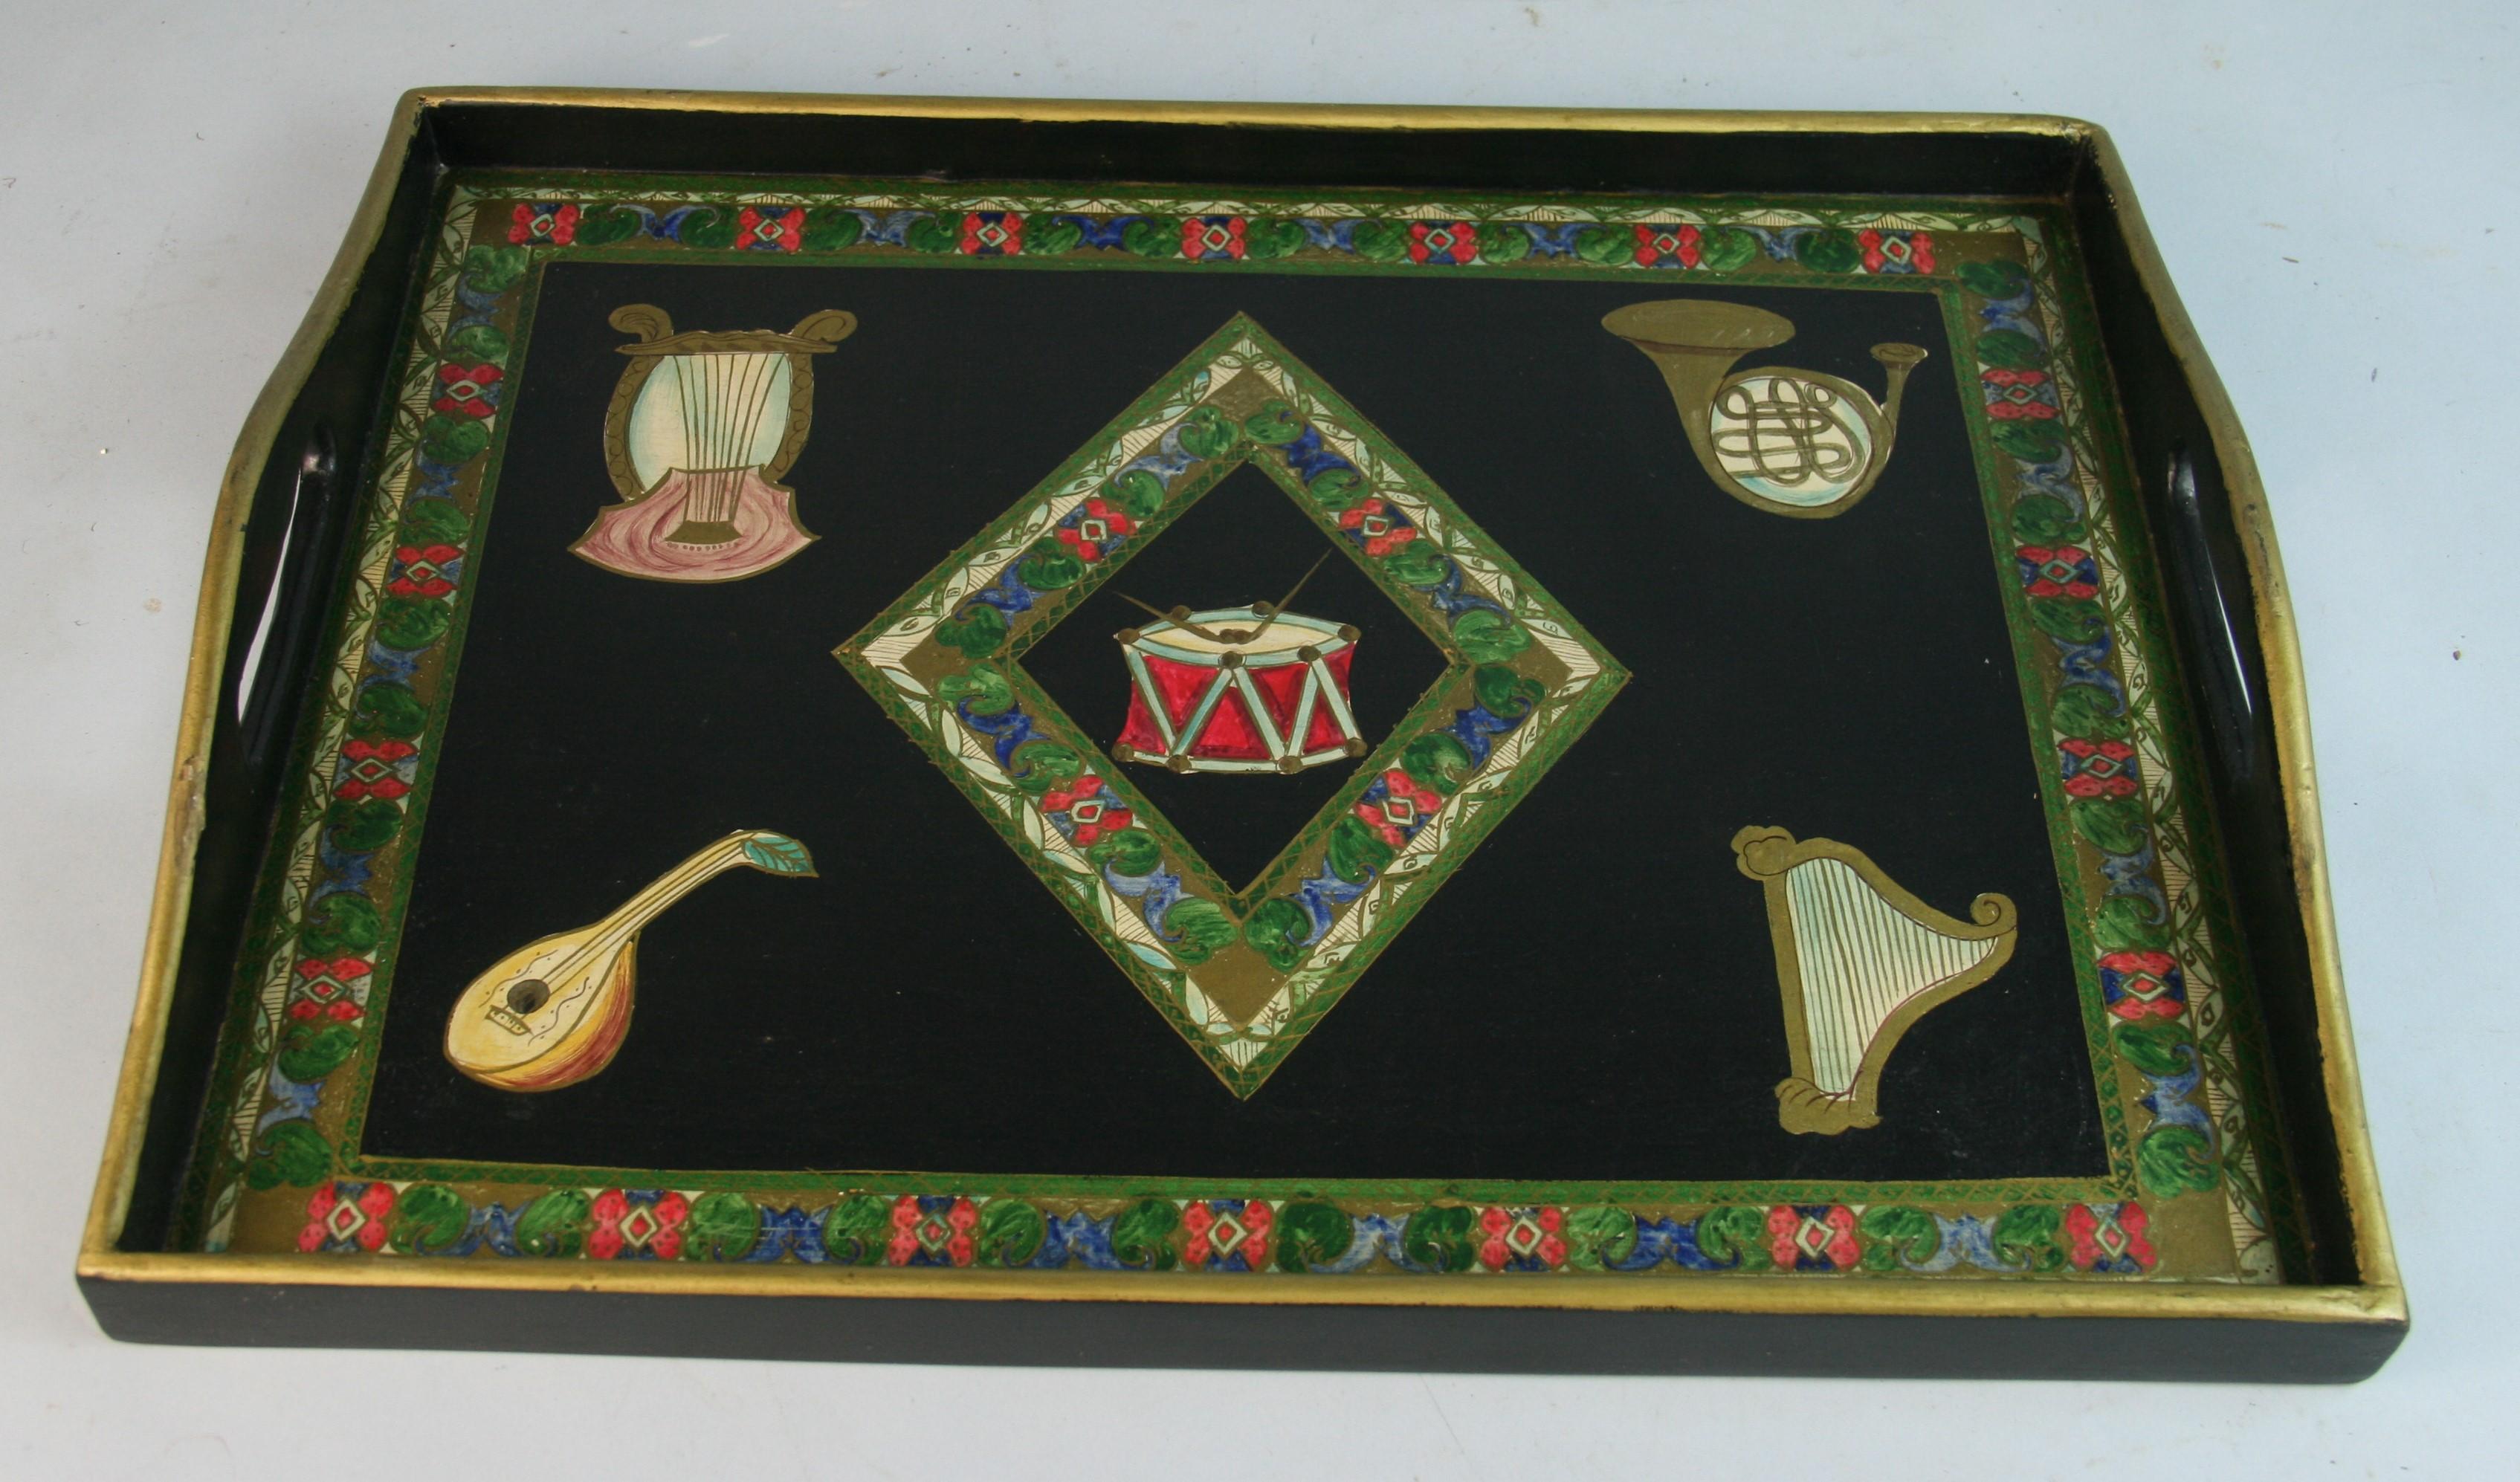 Italian Musical Instrument Hand Painted Serving Tray In Good Condition For Sale In Douglas Manor, NY